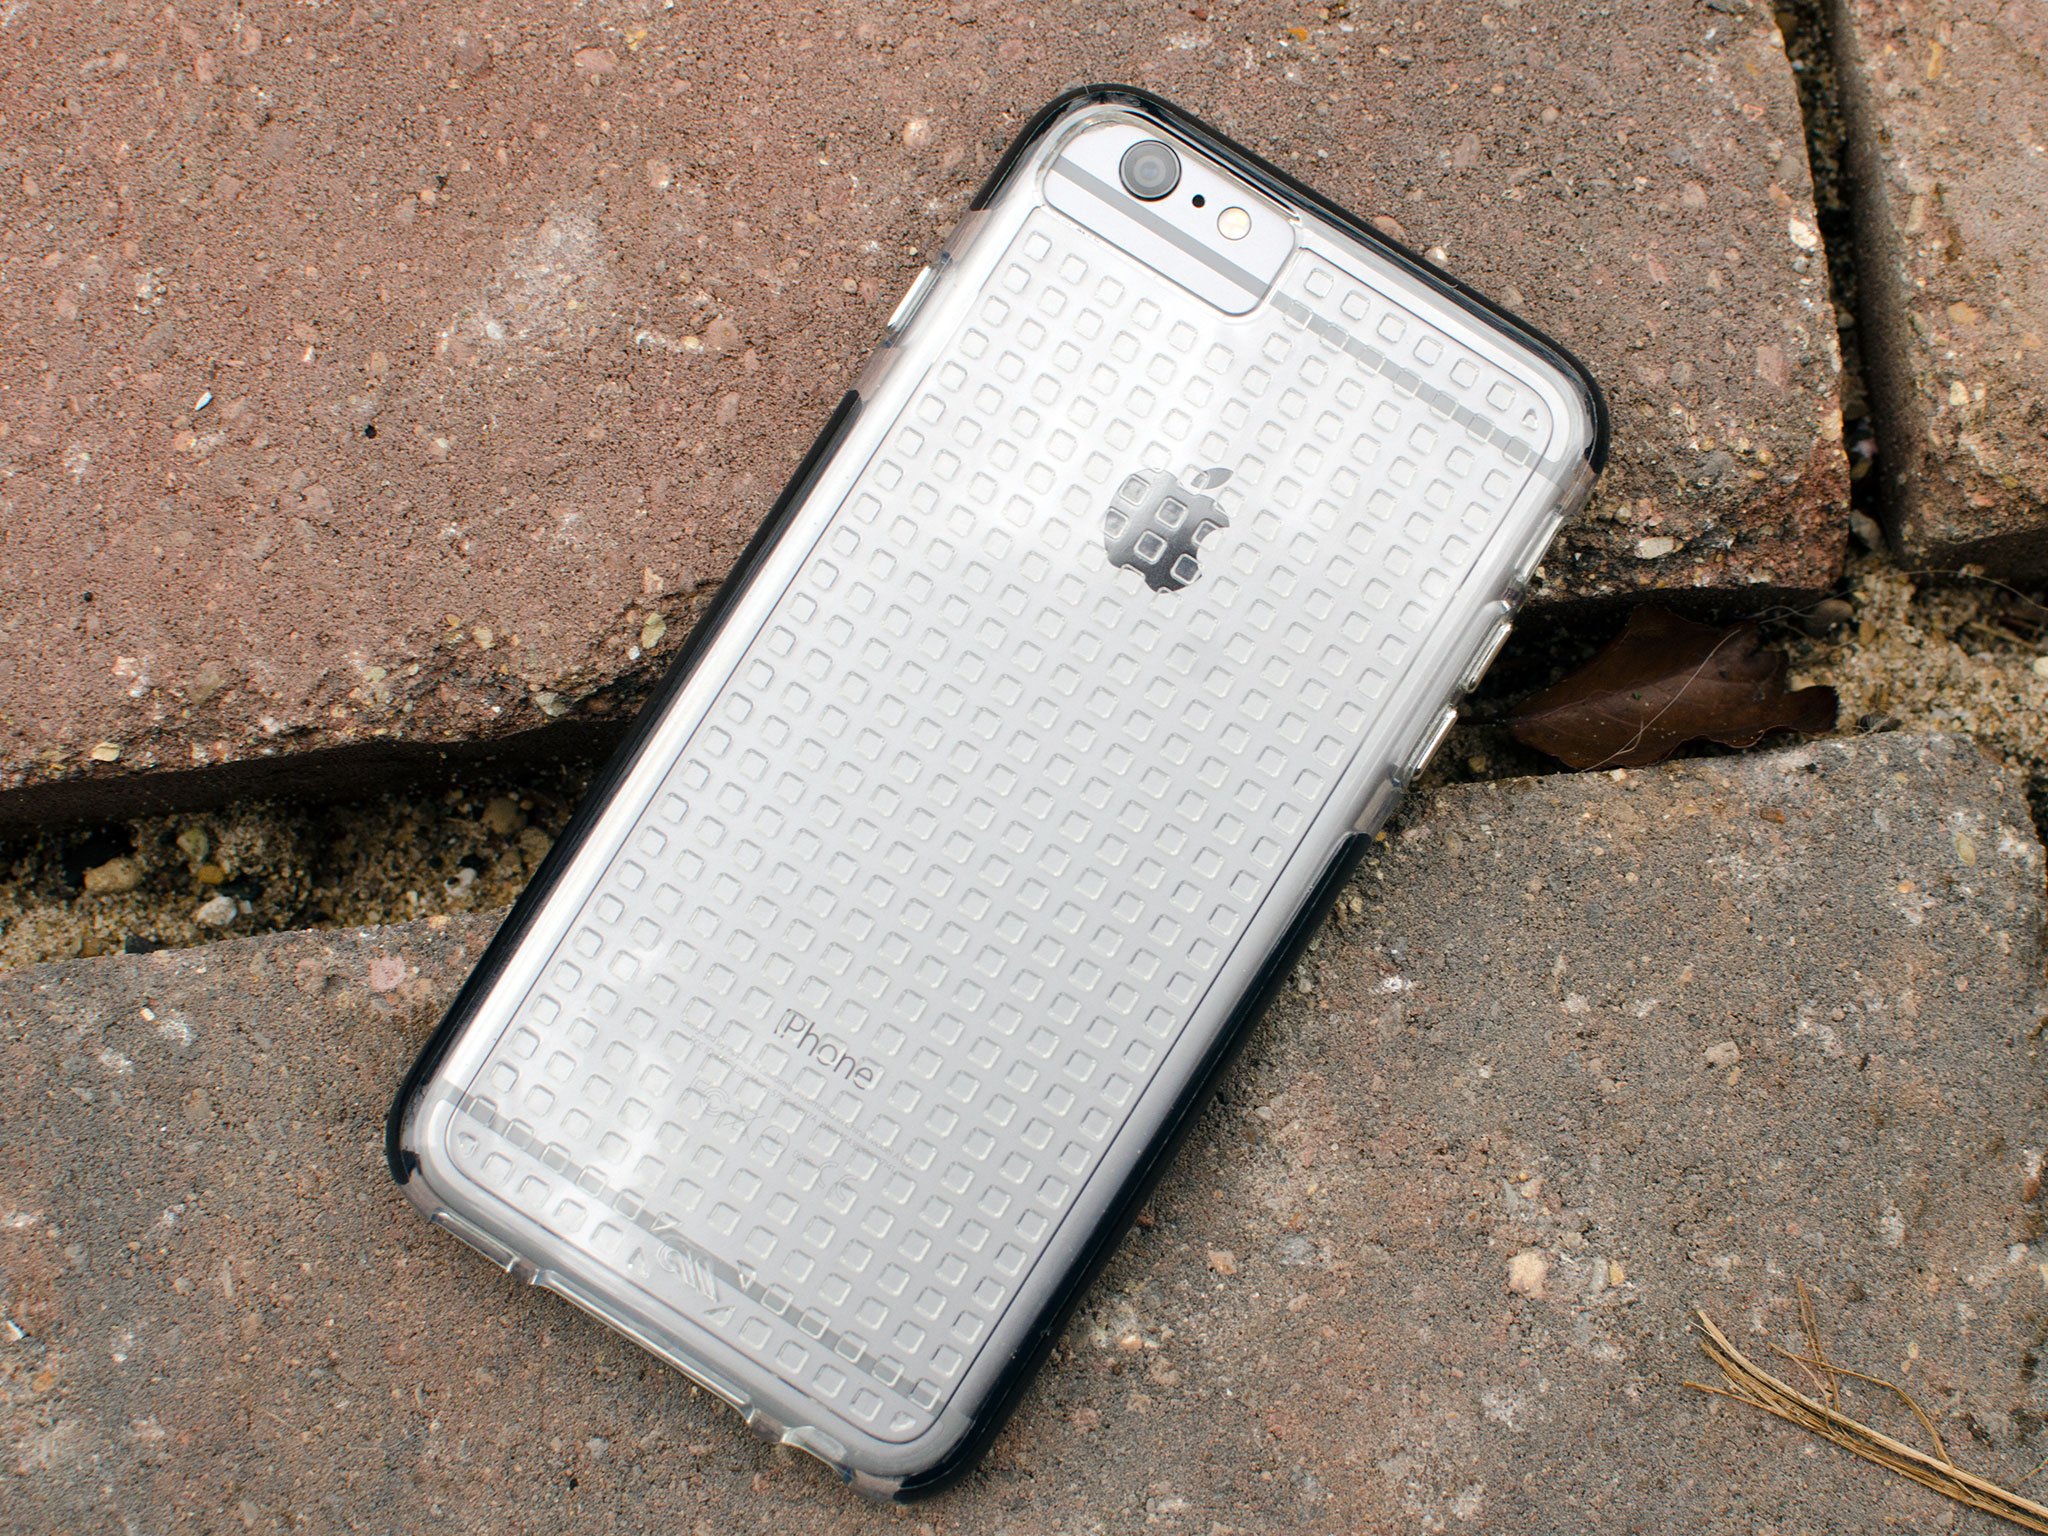 Our favorite clear cases for iPhone 6 Plus